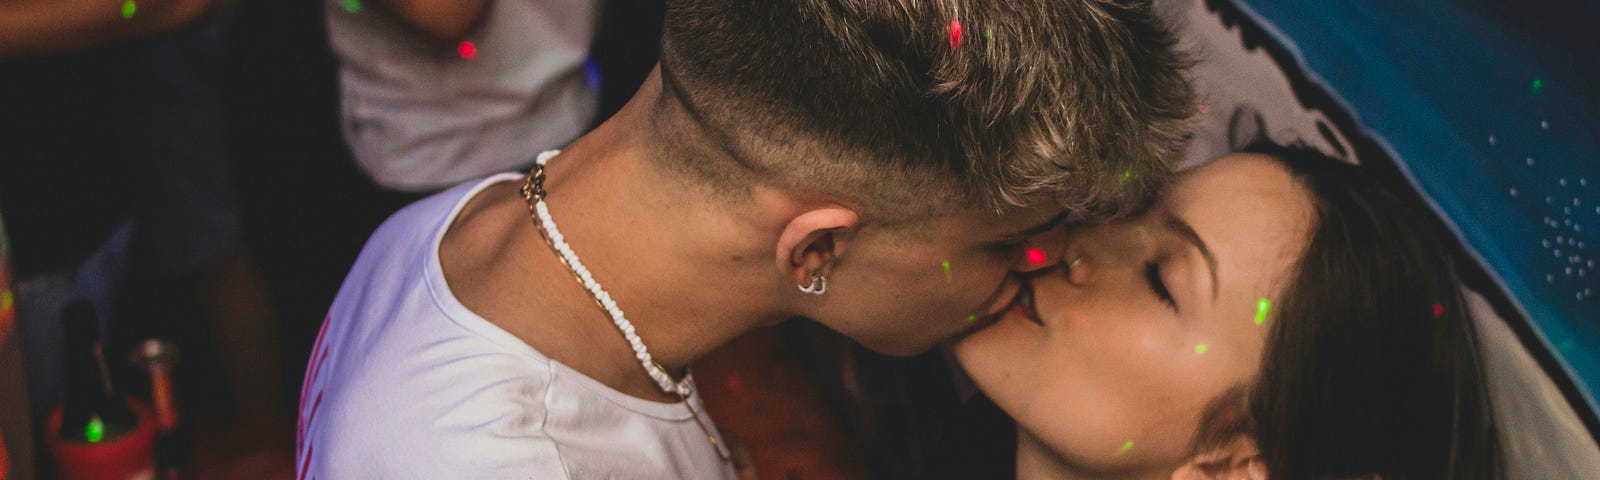 This shows a young couple kissing in a club.